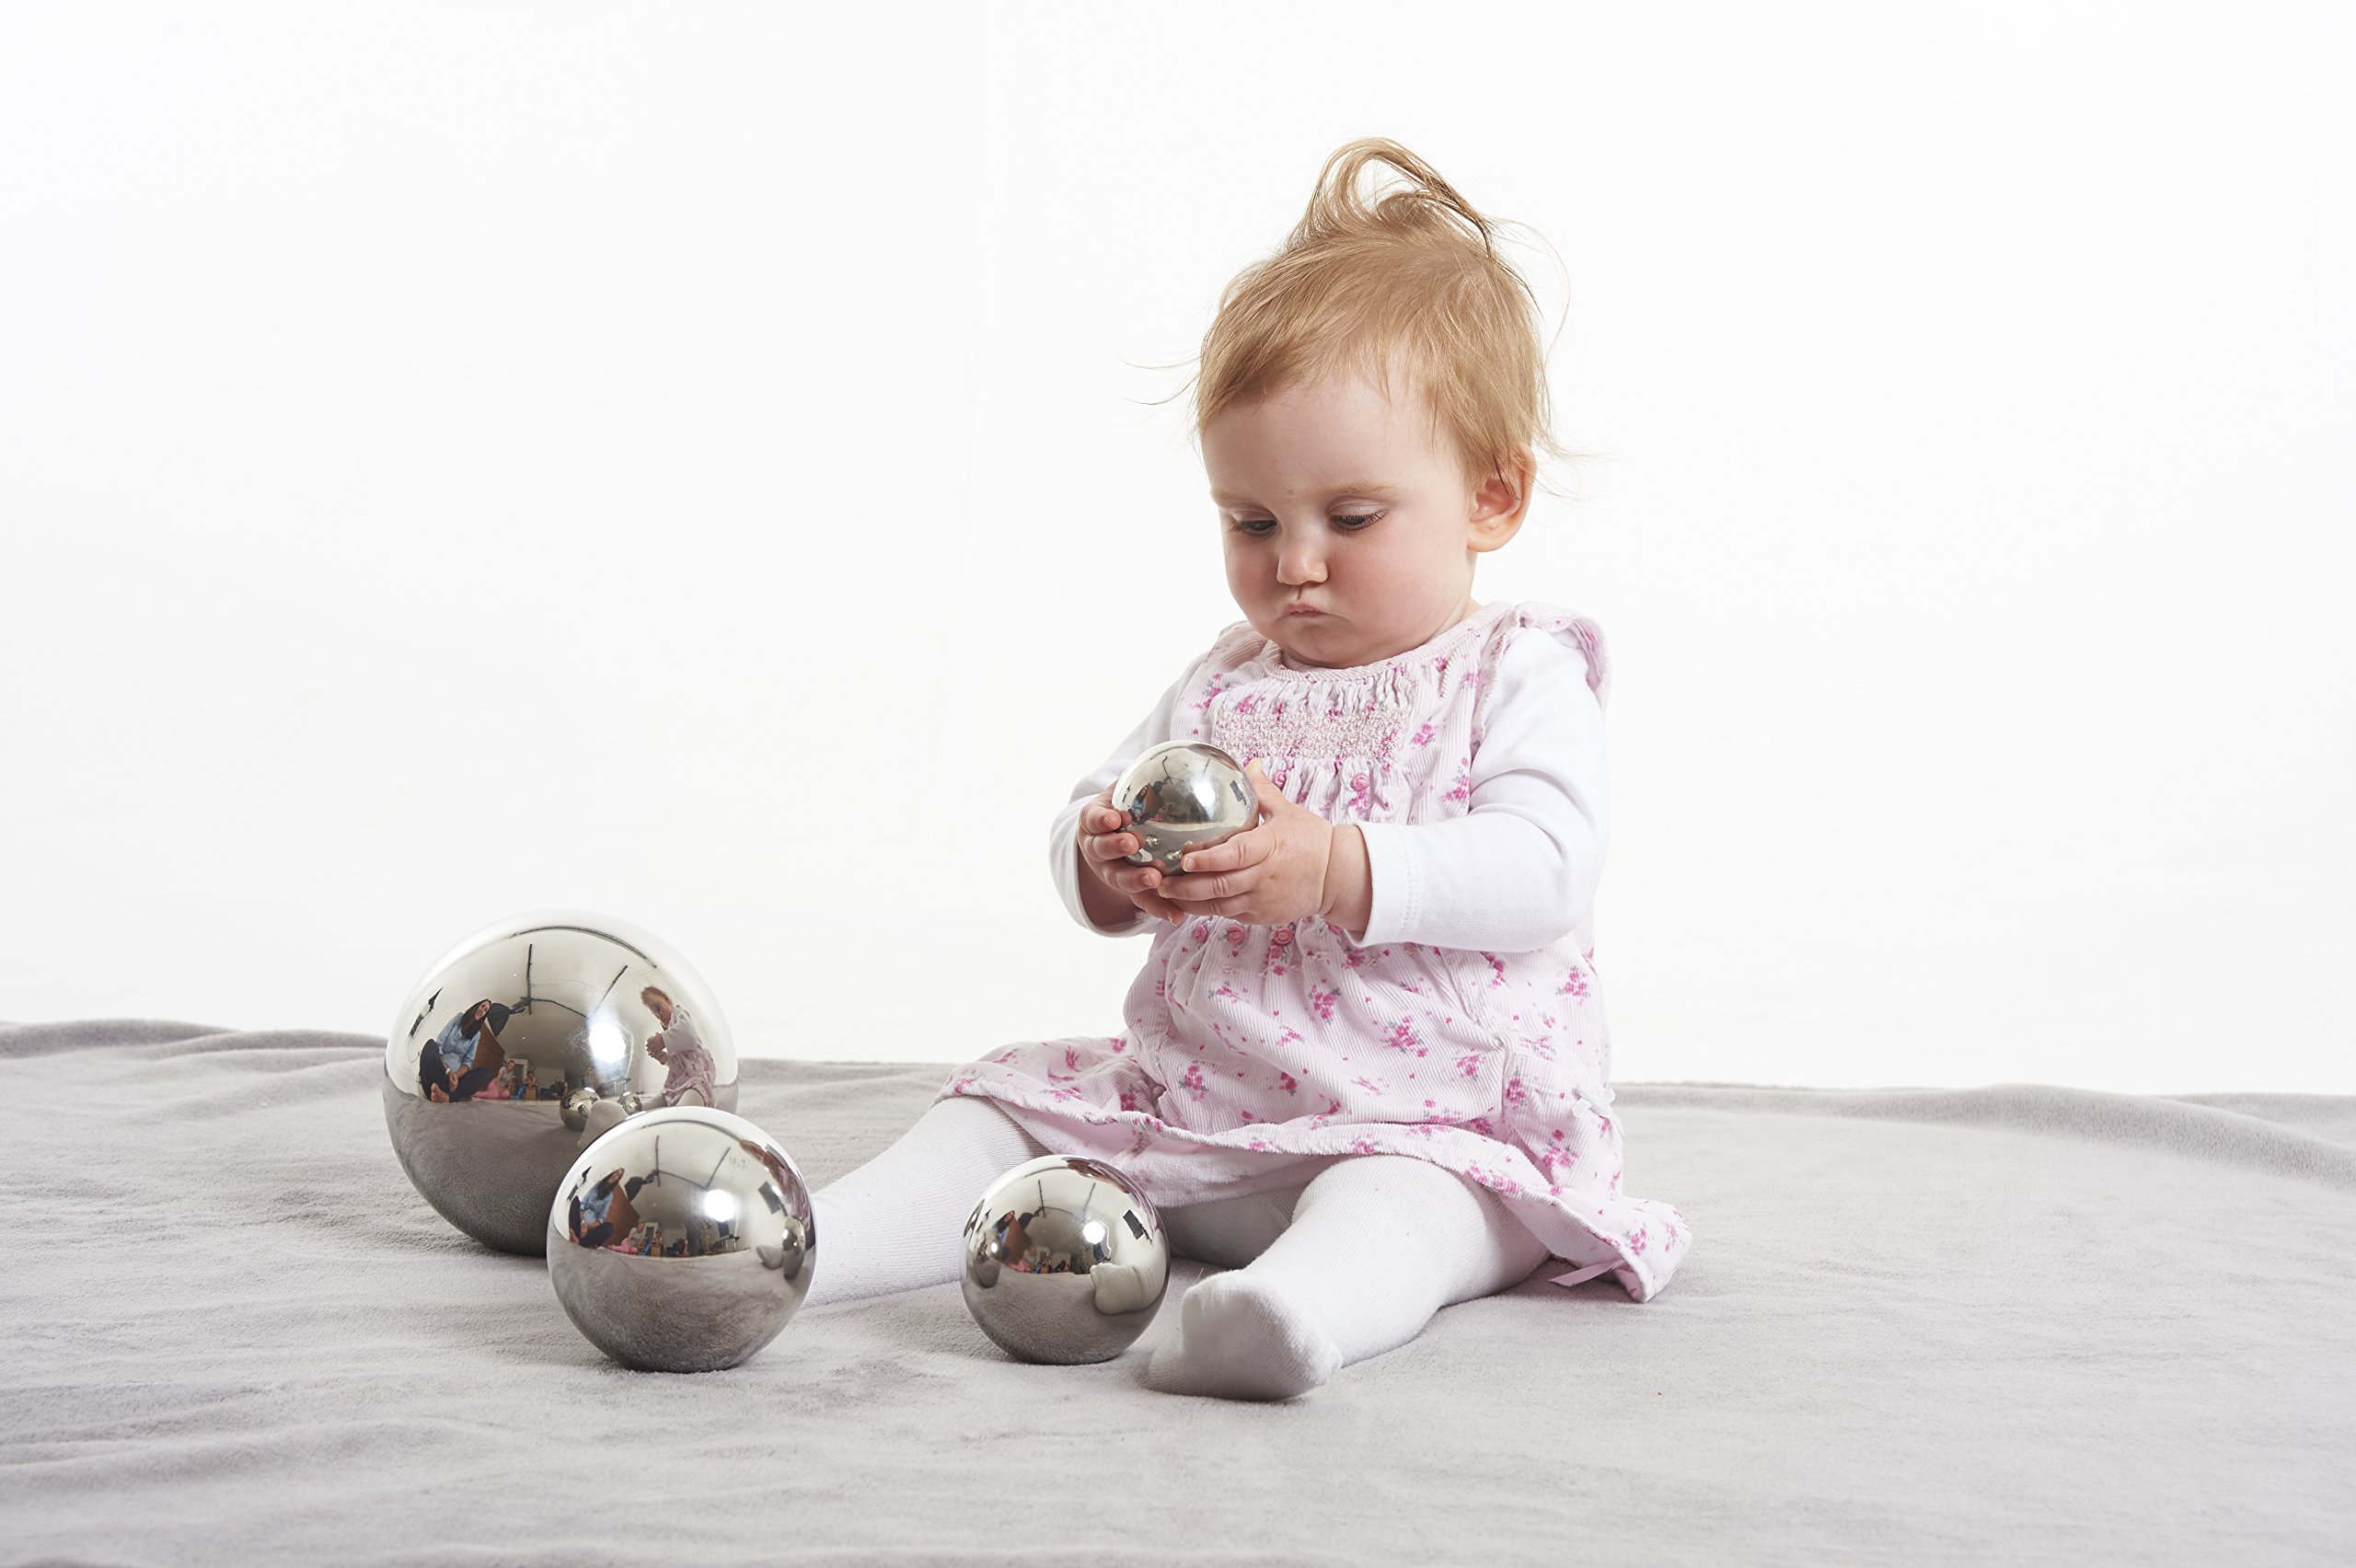 TickiT - 9322 Sensory Reflective Balls - Set of 4 - Mirrored Spheres for Babies and Toddlers - Stainless Steel Sensory Balls for Reflections and Color - For Stylish Nurseries and Bedrooms